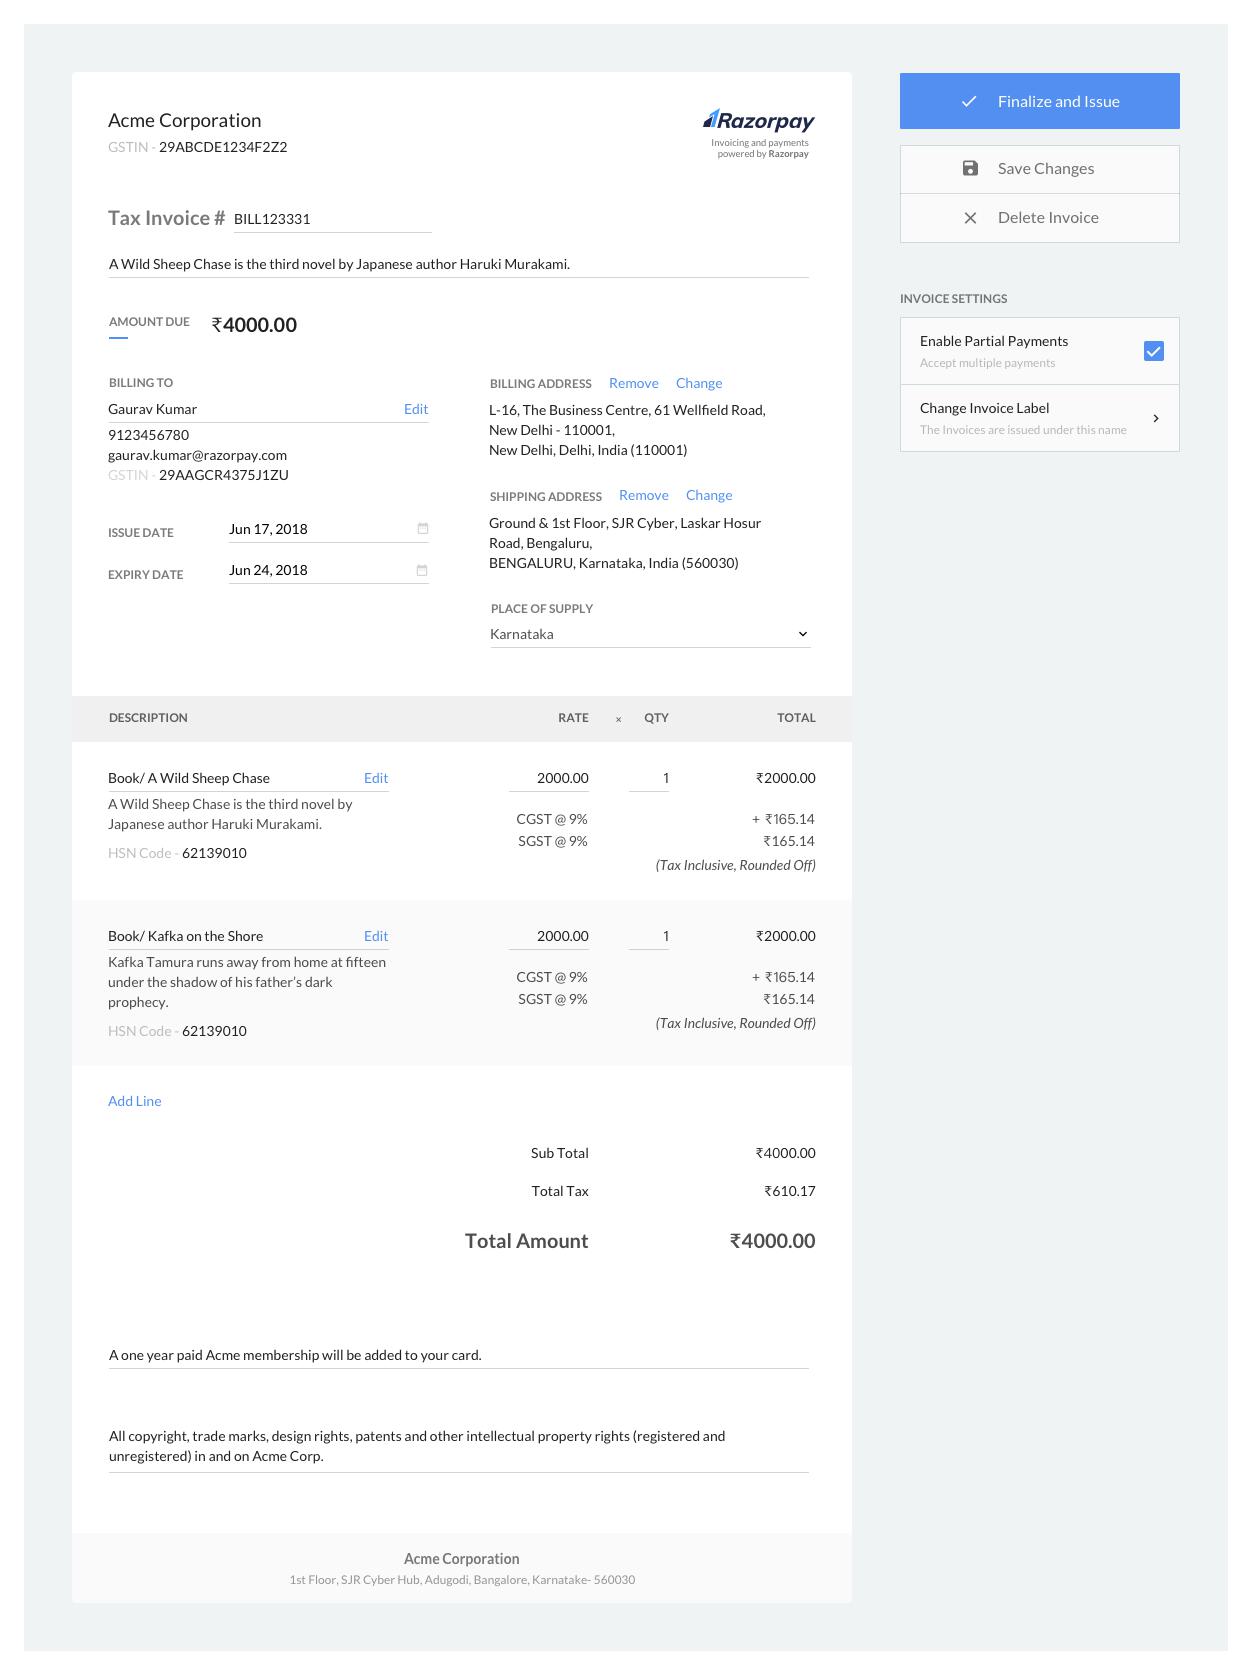 Create invoice from Dashboard